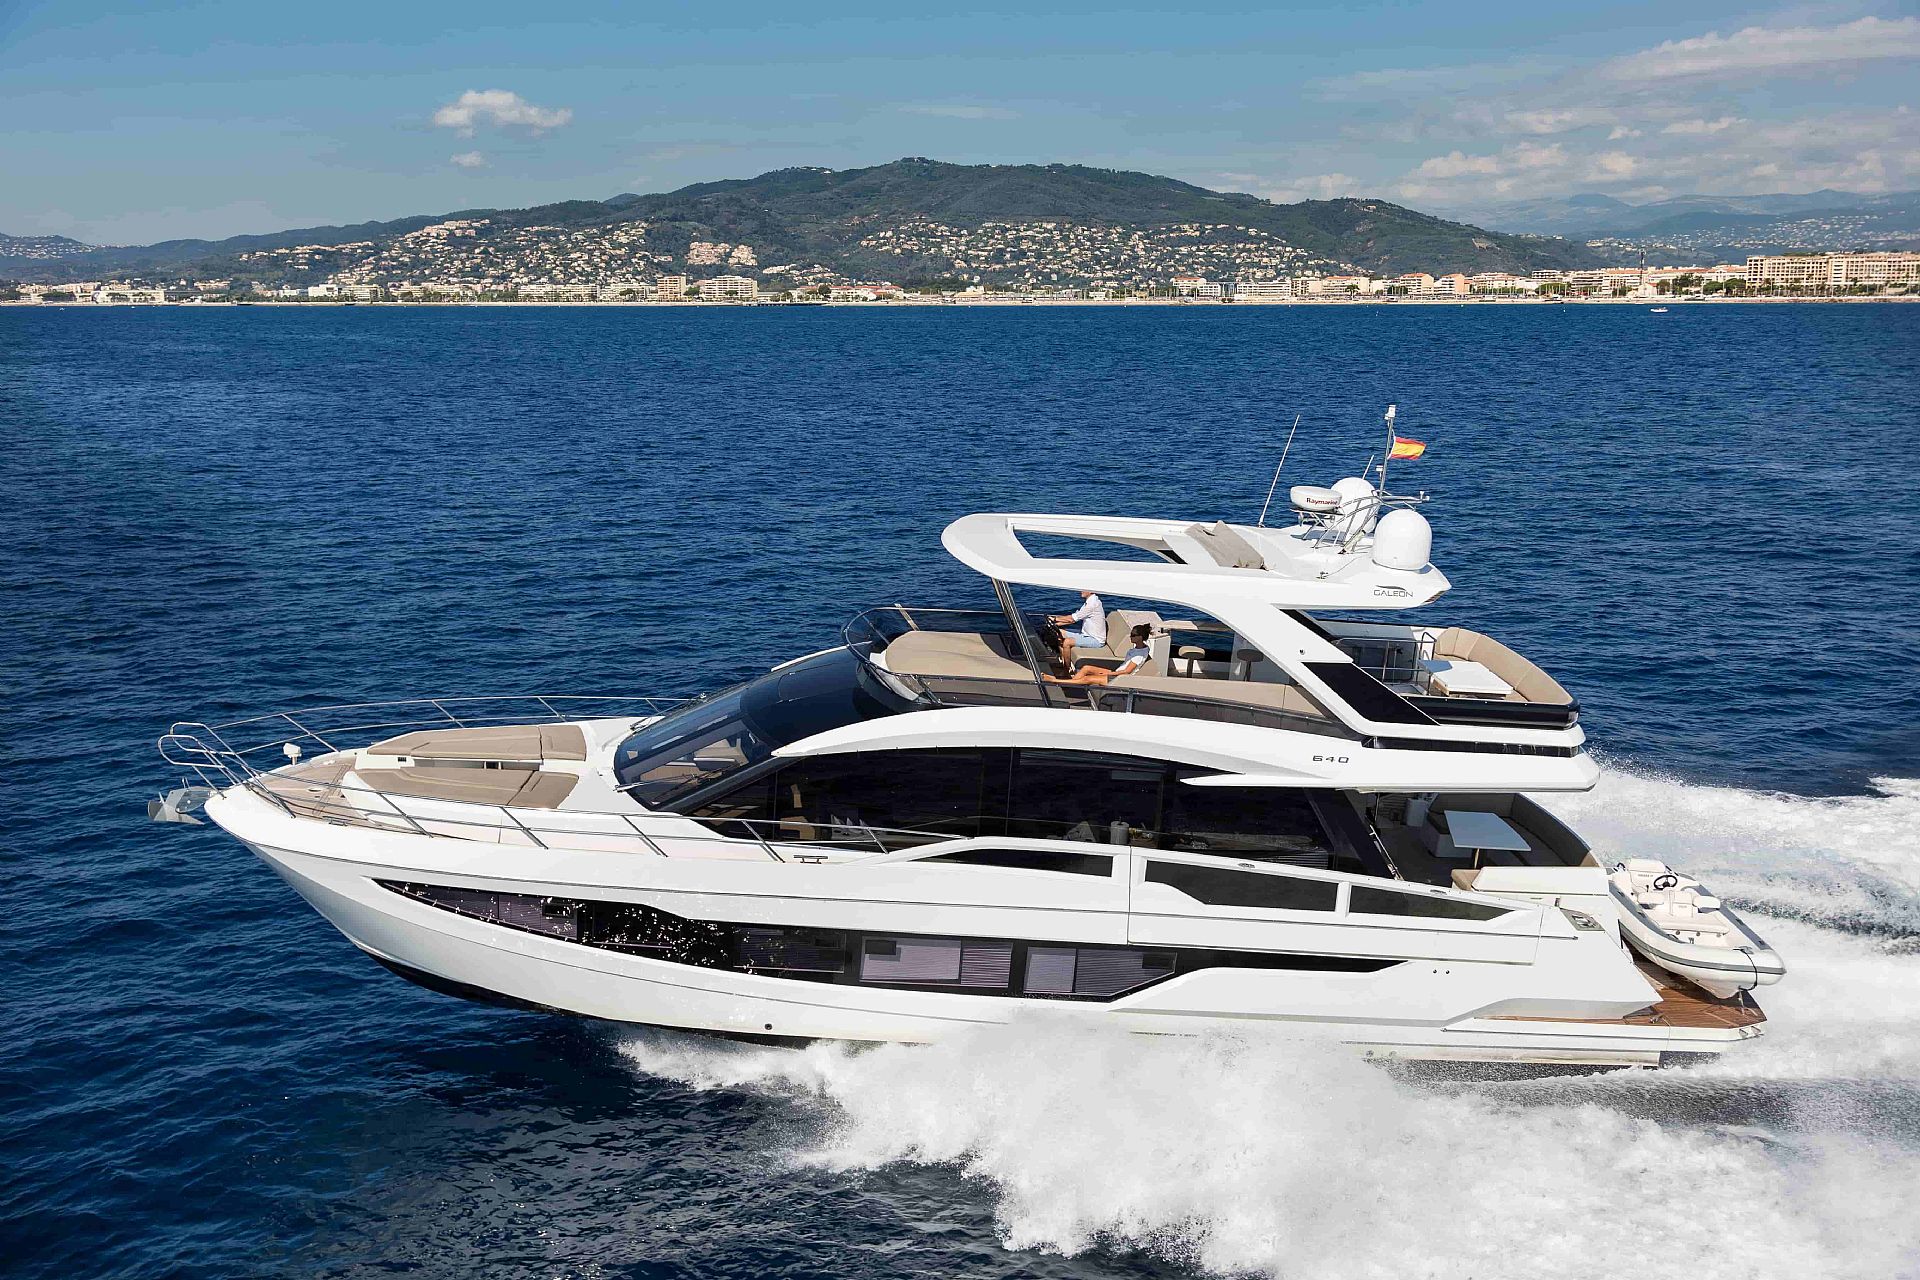 Galeon 640 FLY2022 for sale: 1549500.-EUR